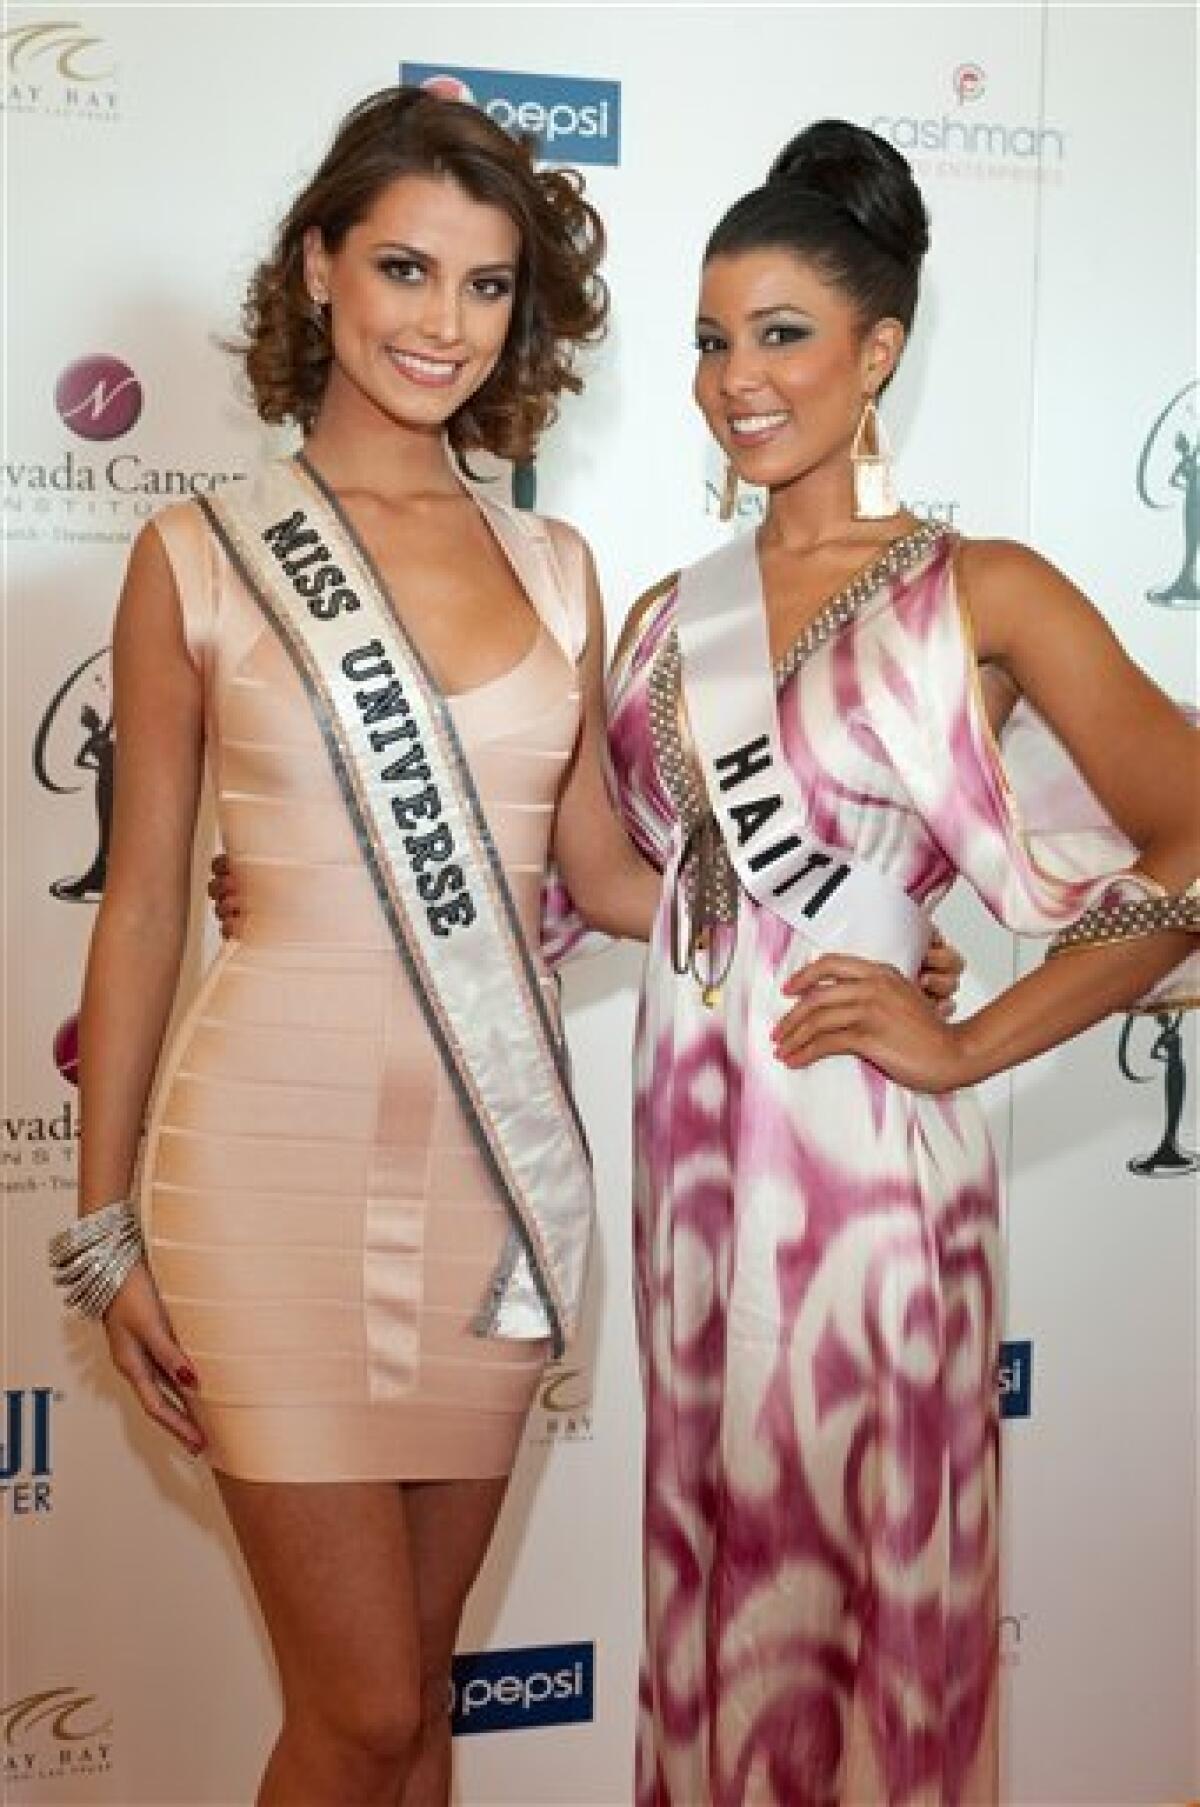 In this image provided by the Miss Universe Organization, Stefania Fernandez, Miss Universe 2009, and Sarodj Bertin, Miss Haiti 2010, arrive at the Miss Universe National Gift Auction to Benefit Nevada Cancer Institute at Mandalay Bay Resort and Casino in Las Vegas, Nevada on Saturday, Aug. 14, 2010. The Miss Universe 2010 competition that will air live Aug. 23, 2010. (AP Photo/Miss Universe Organization)